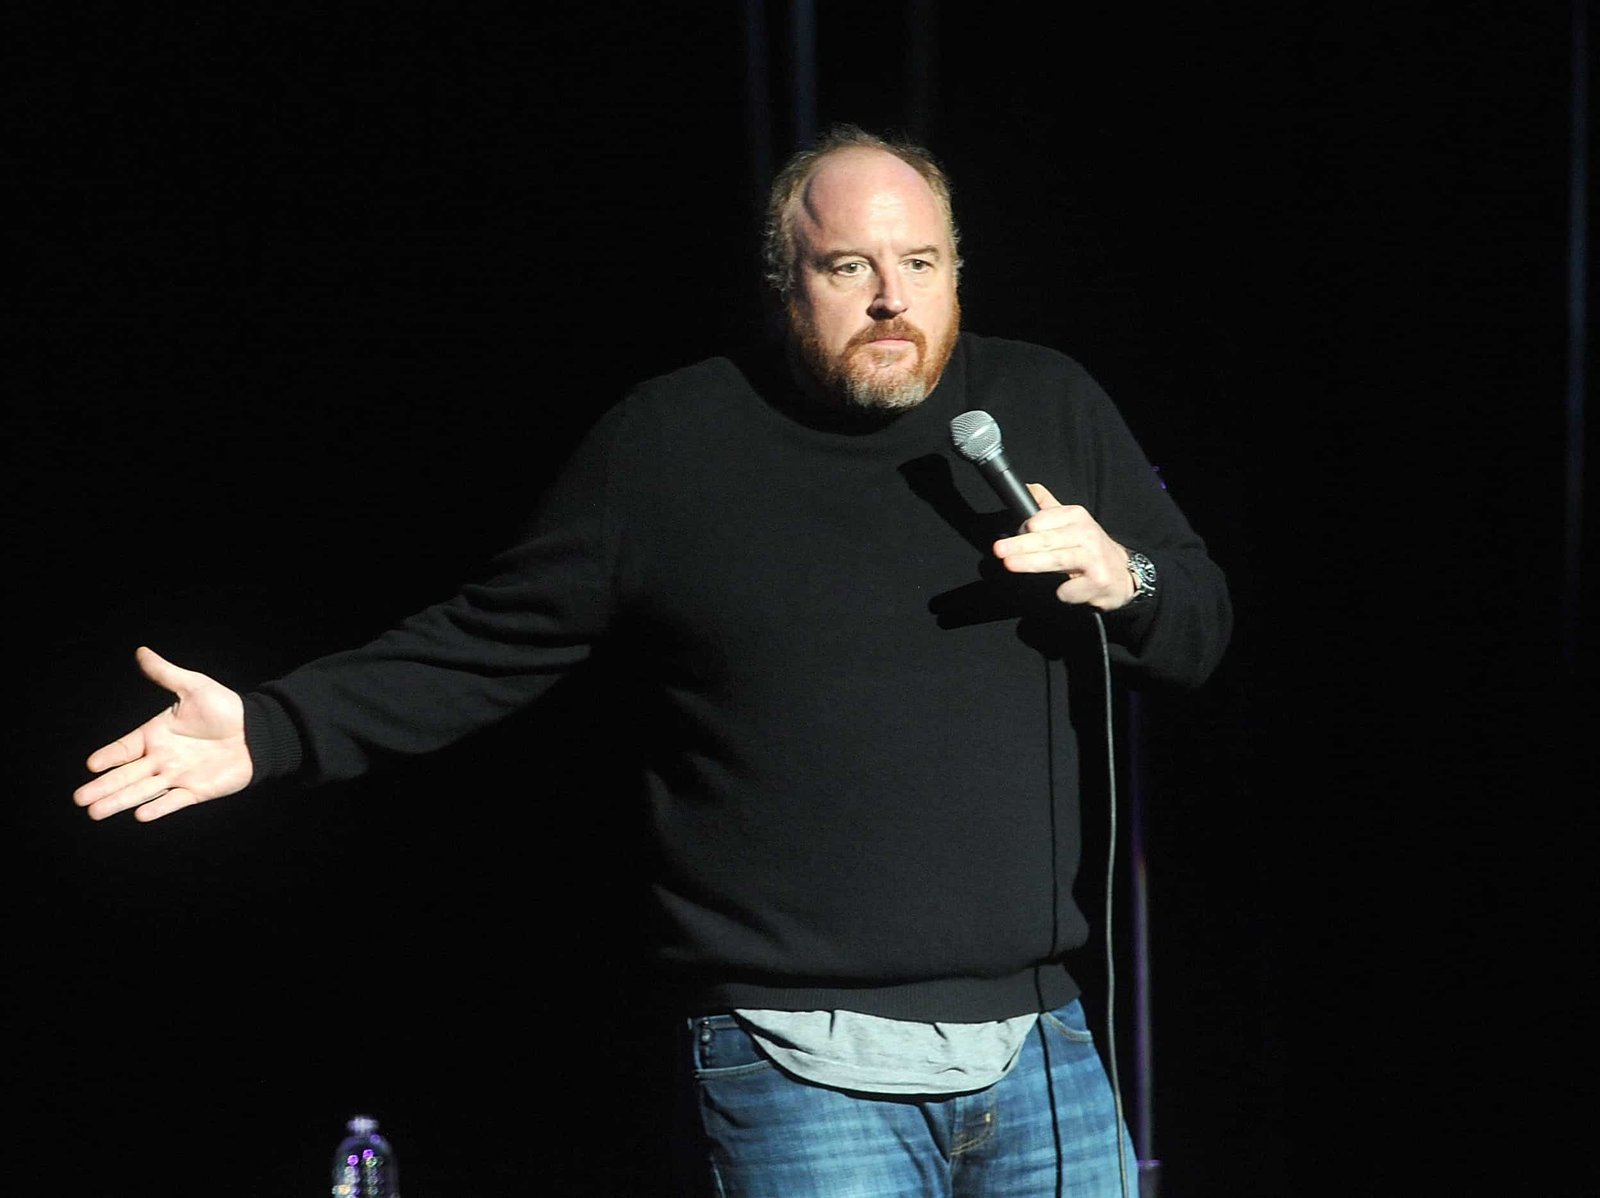 Where Is Louis C.K. Now?